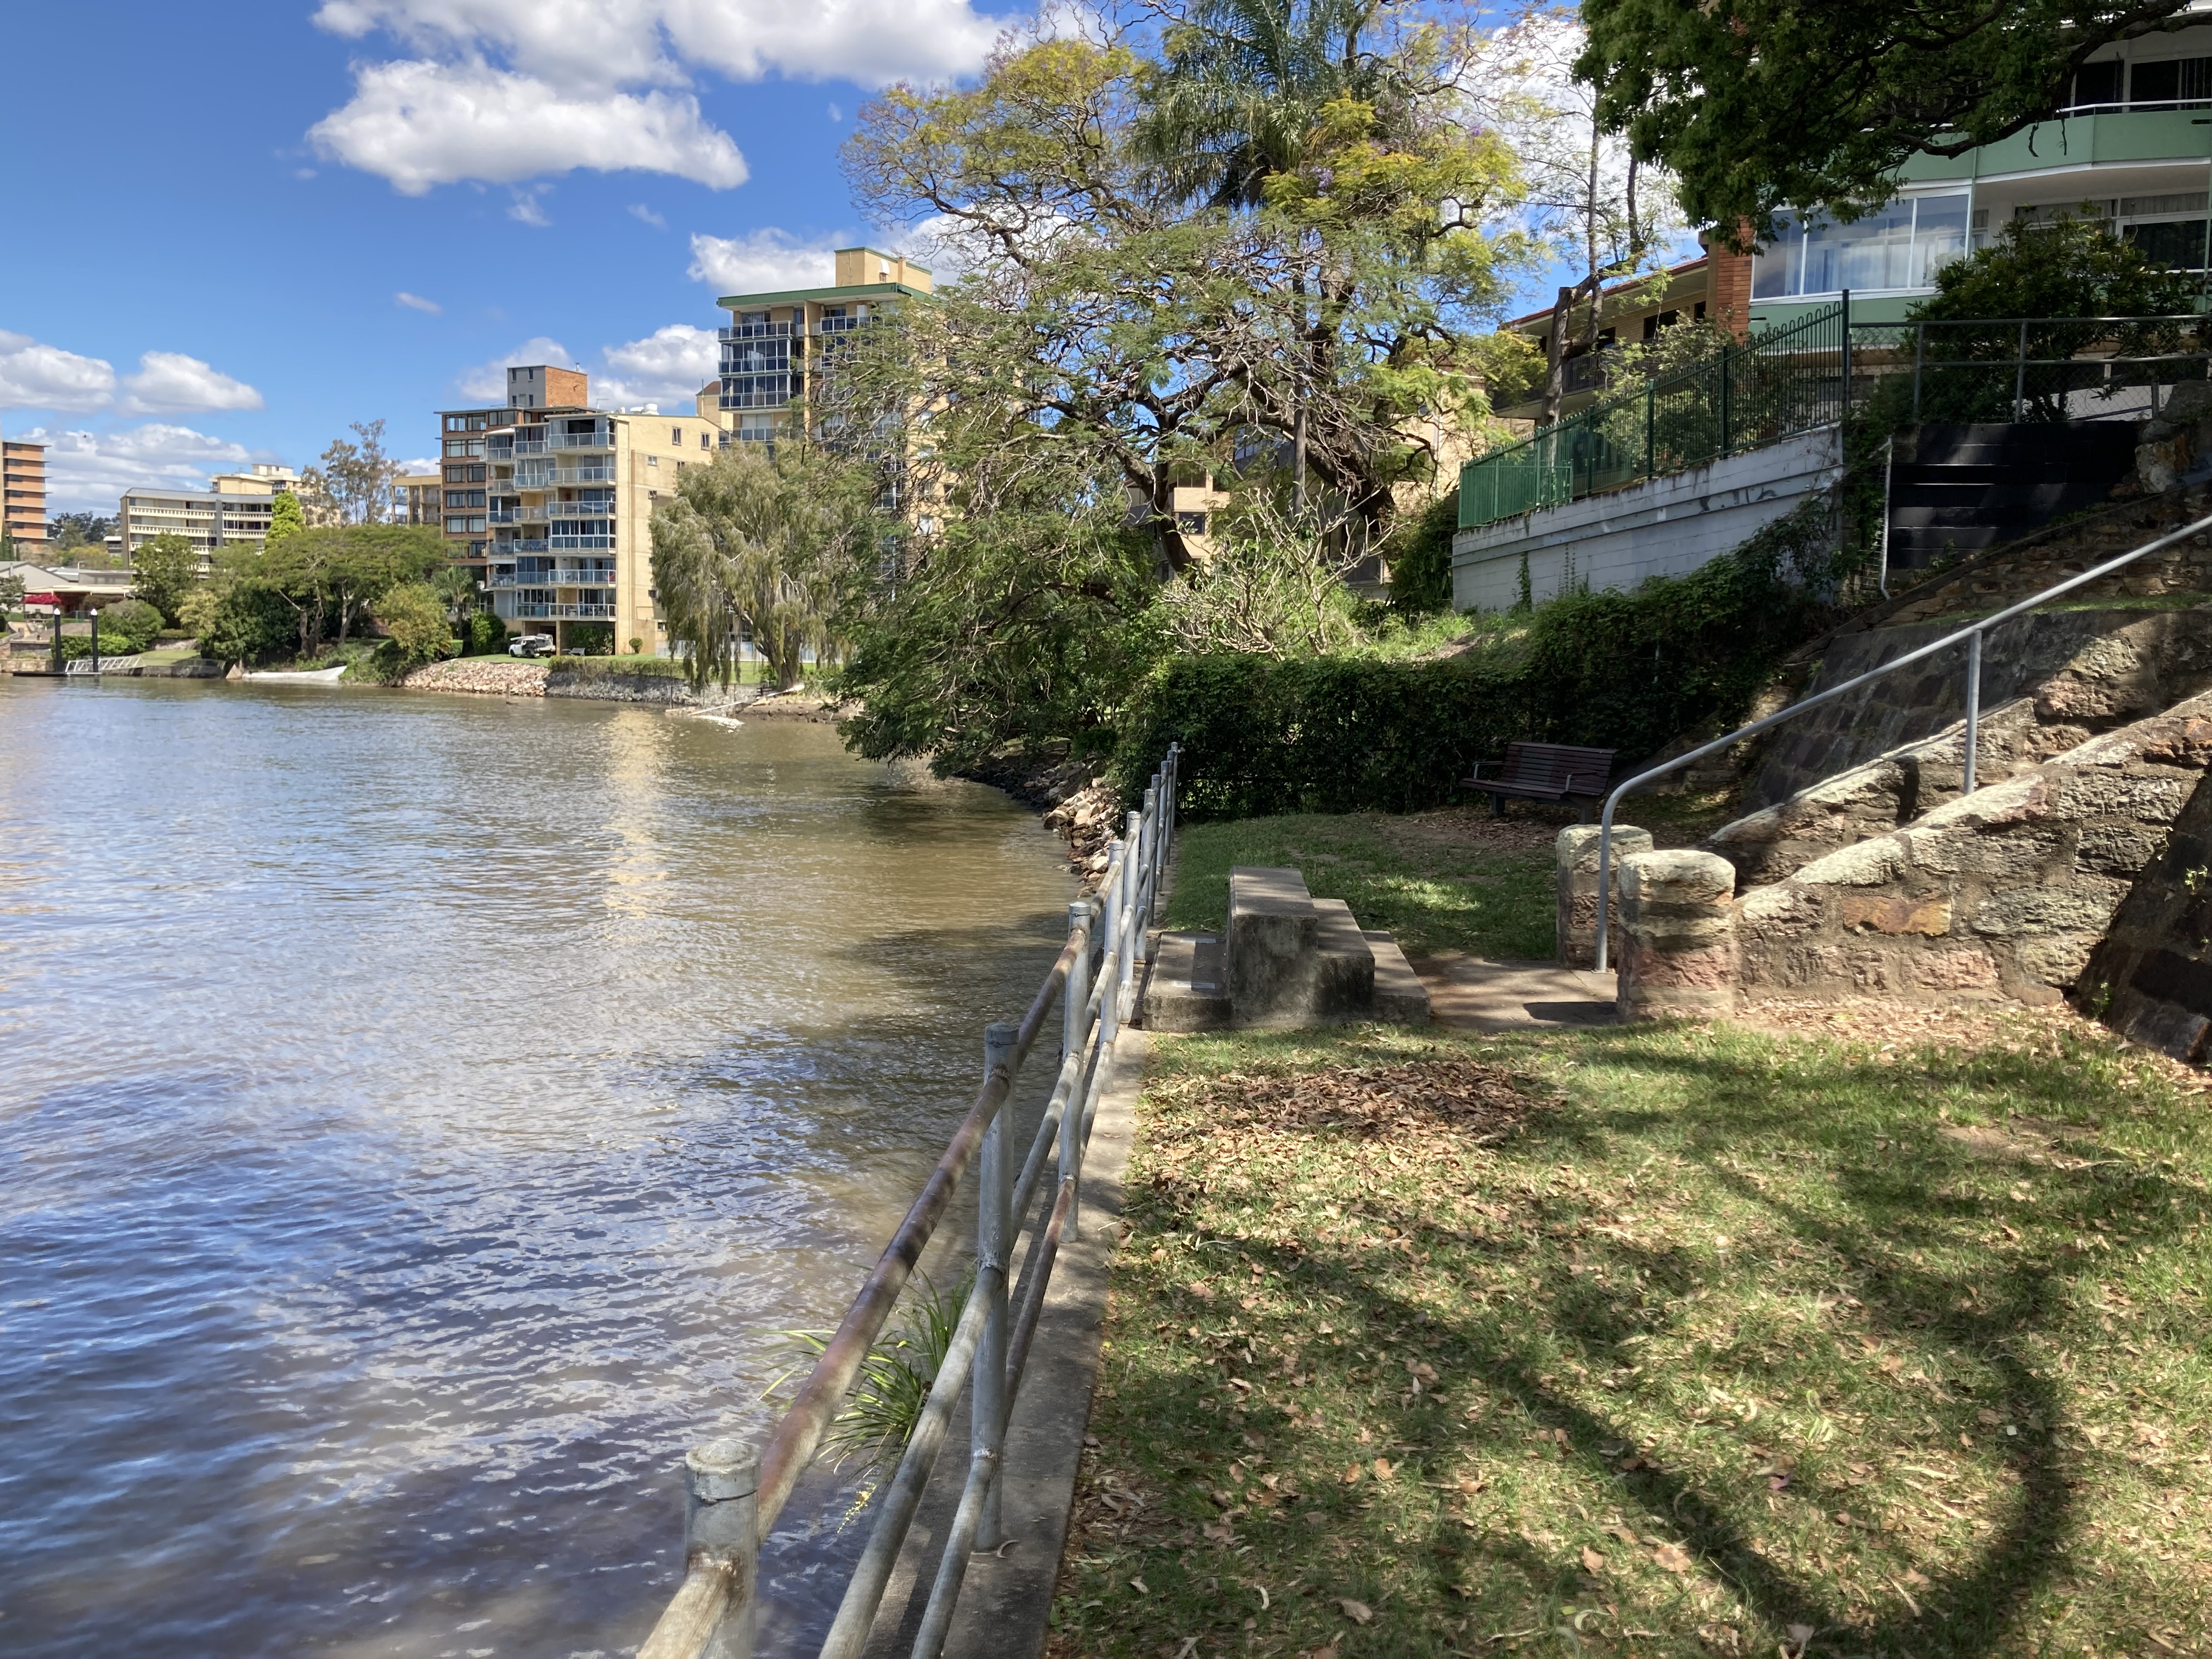 A park at the edge of the Brisbane River. The River is on the left of the image. A metal railing separates the grassy area of the park and the River. A small set of concrete stairs in the centre of the image lead up to the railing. A larger set of stone stairs continue off the right of the image. The background contains large apartment blocks and mature trees.